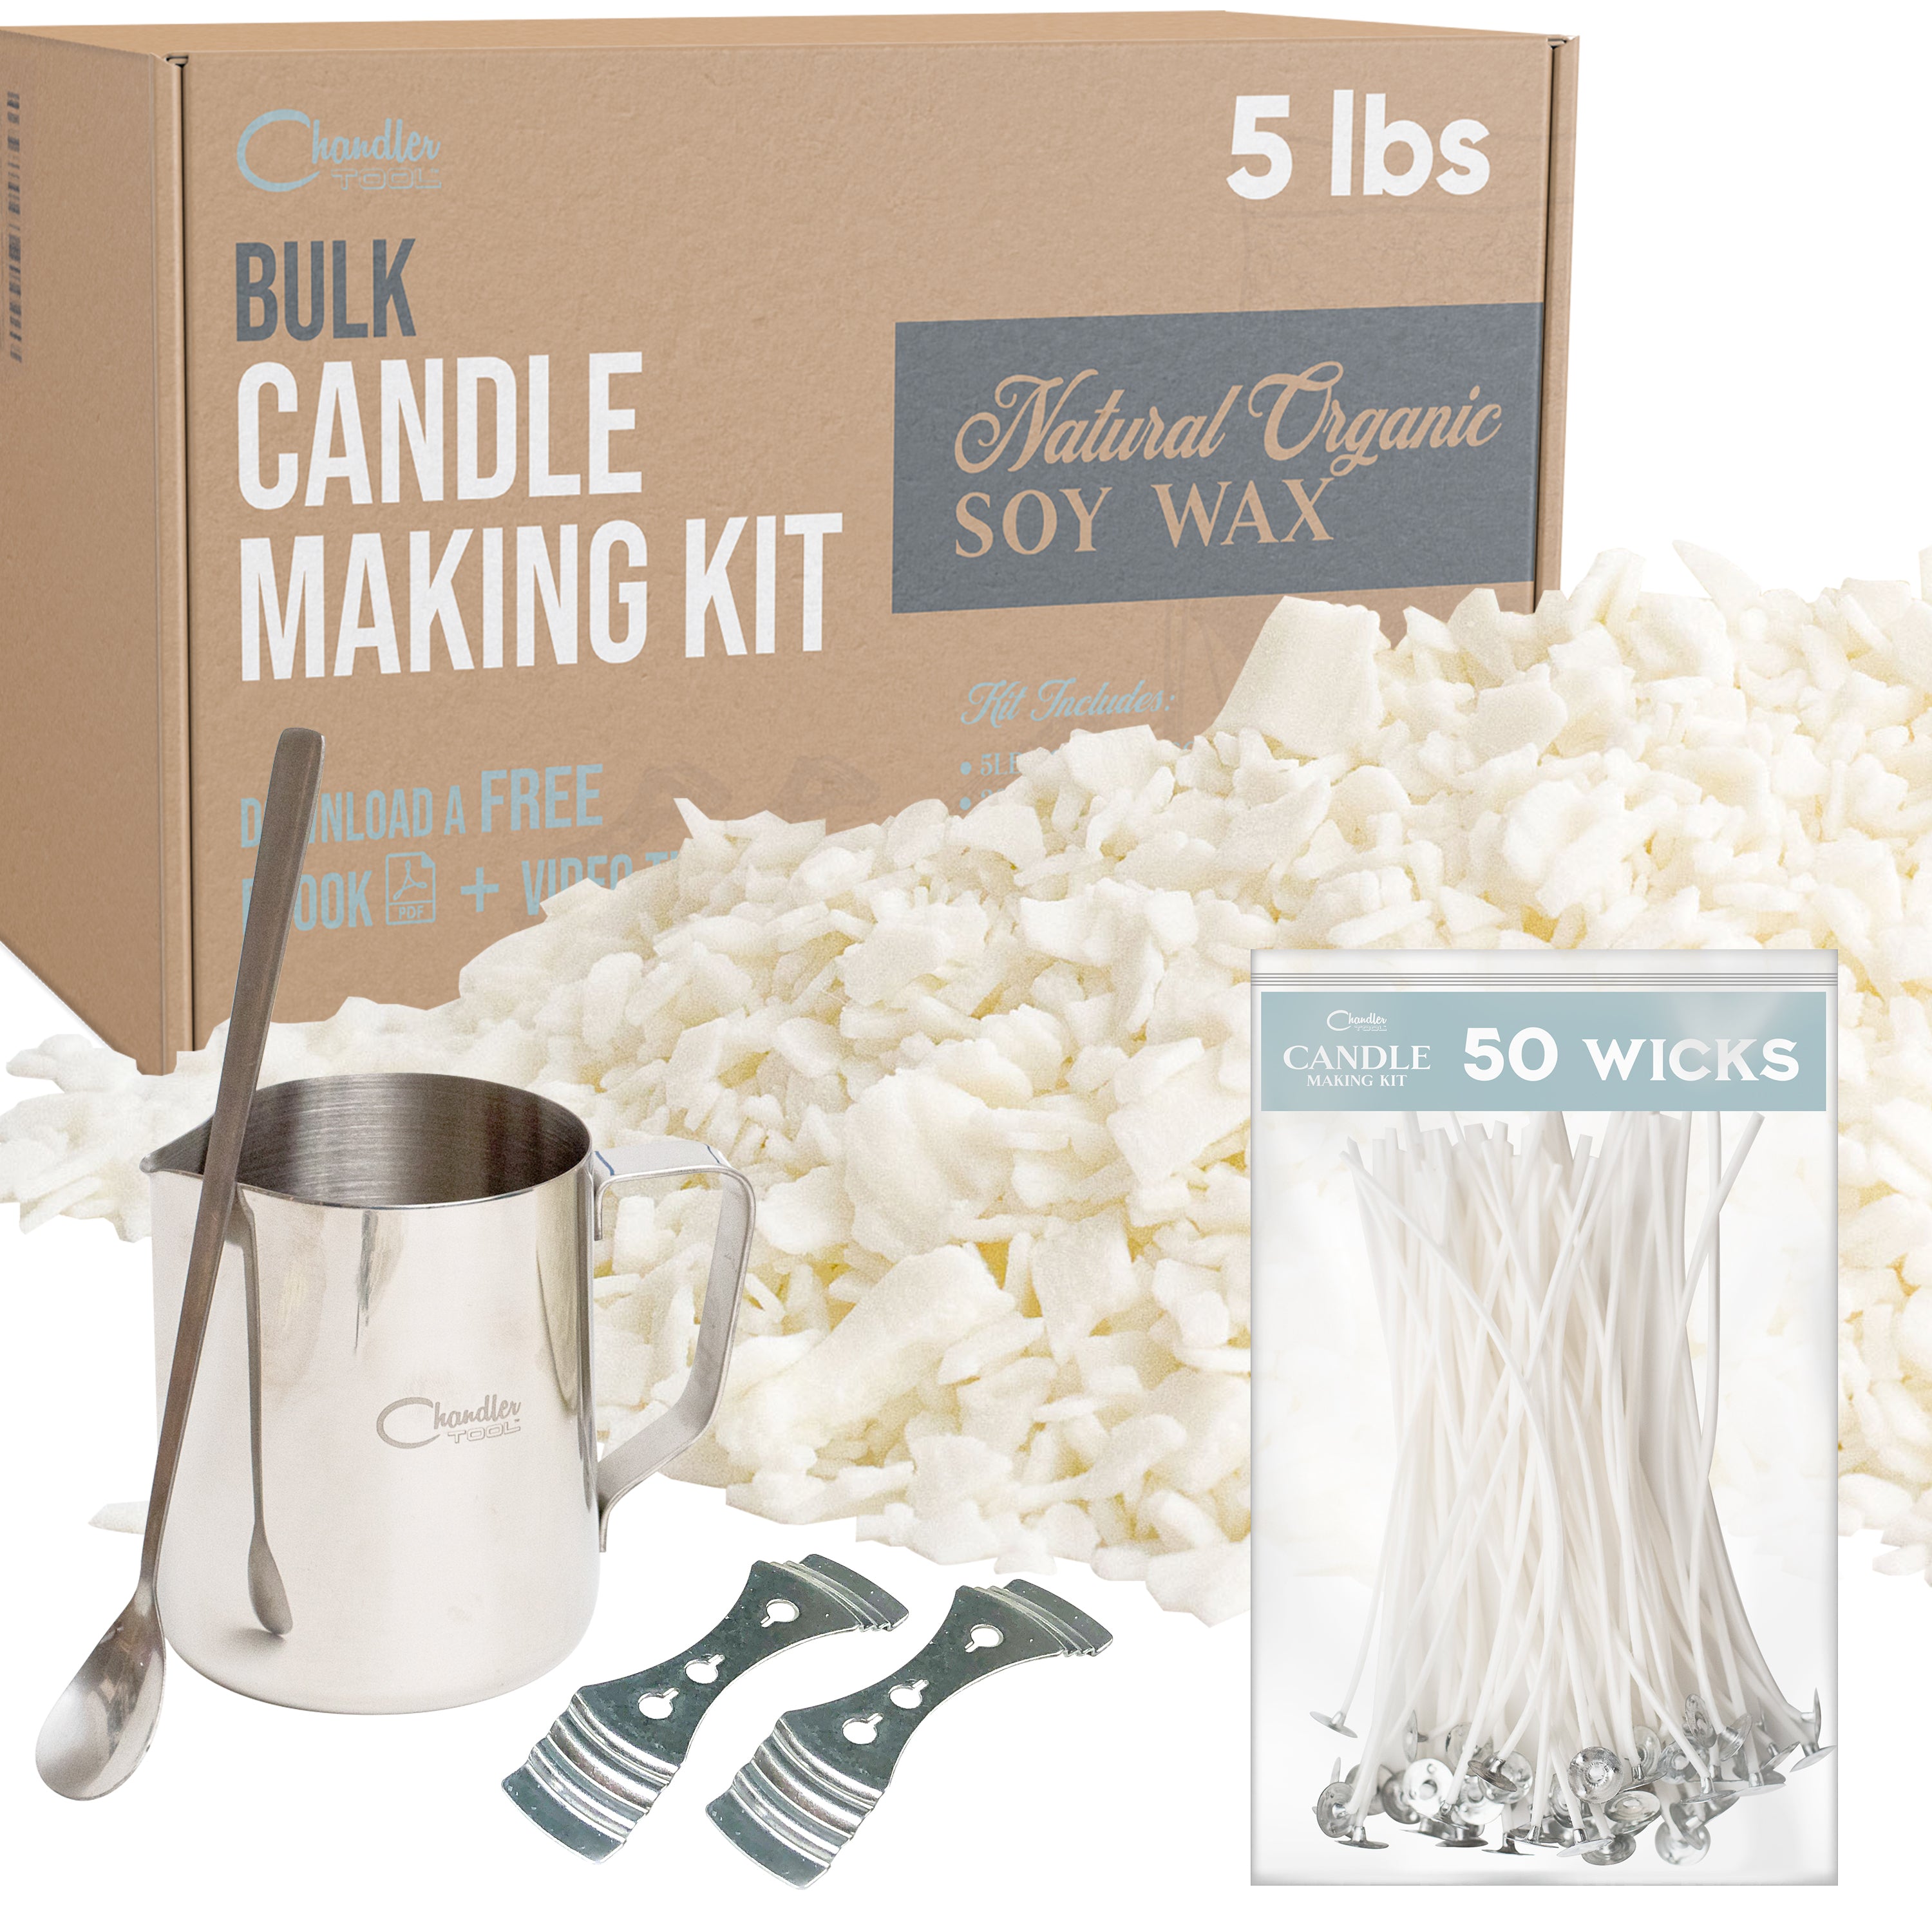 Candle Making Kits Archives - Chandler & Me - USA